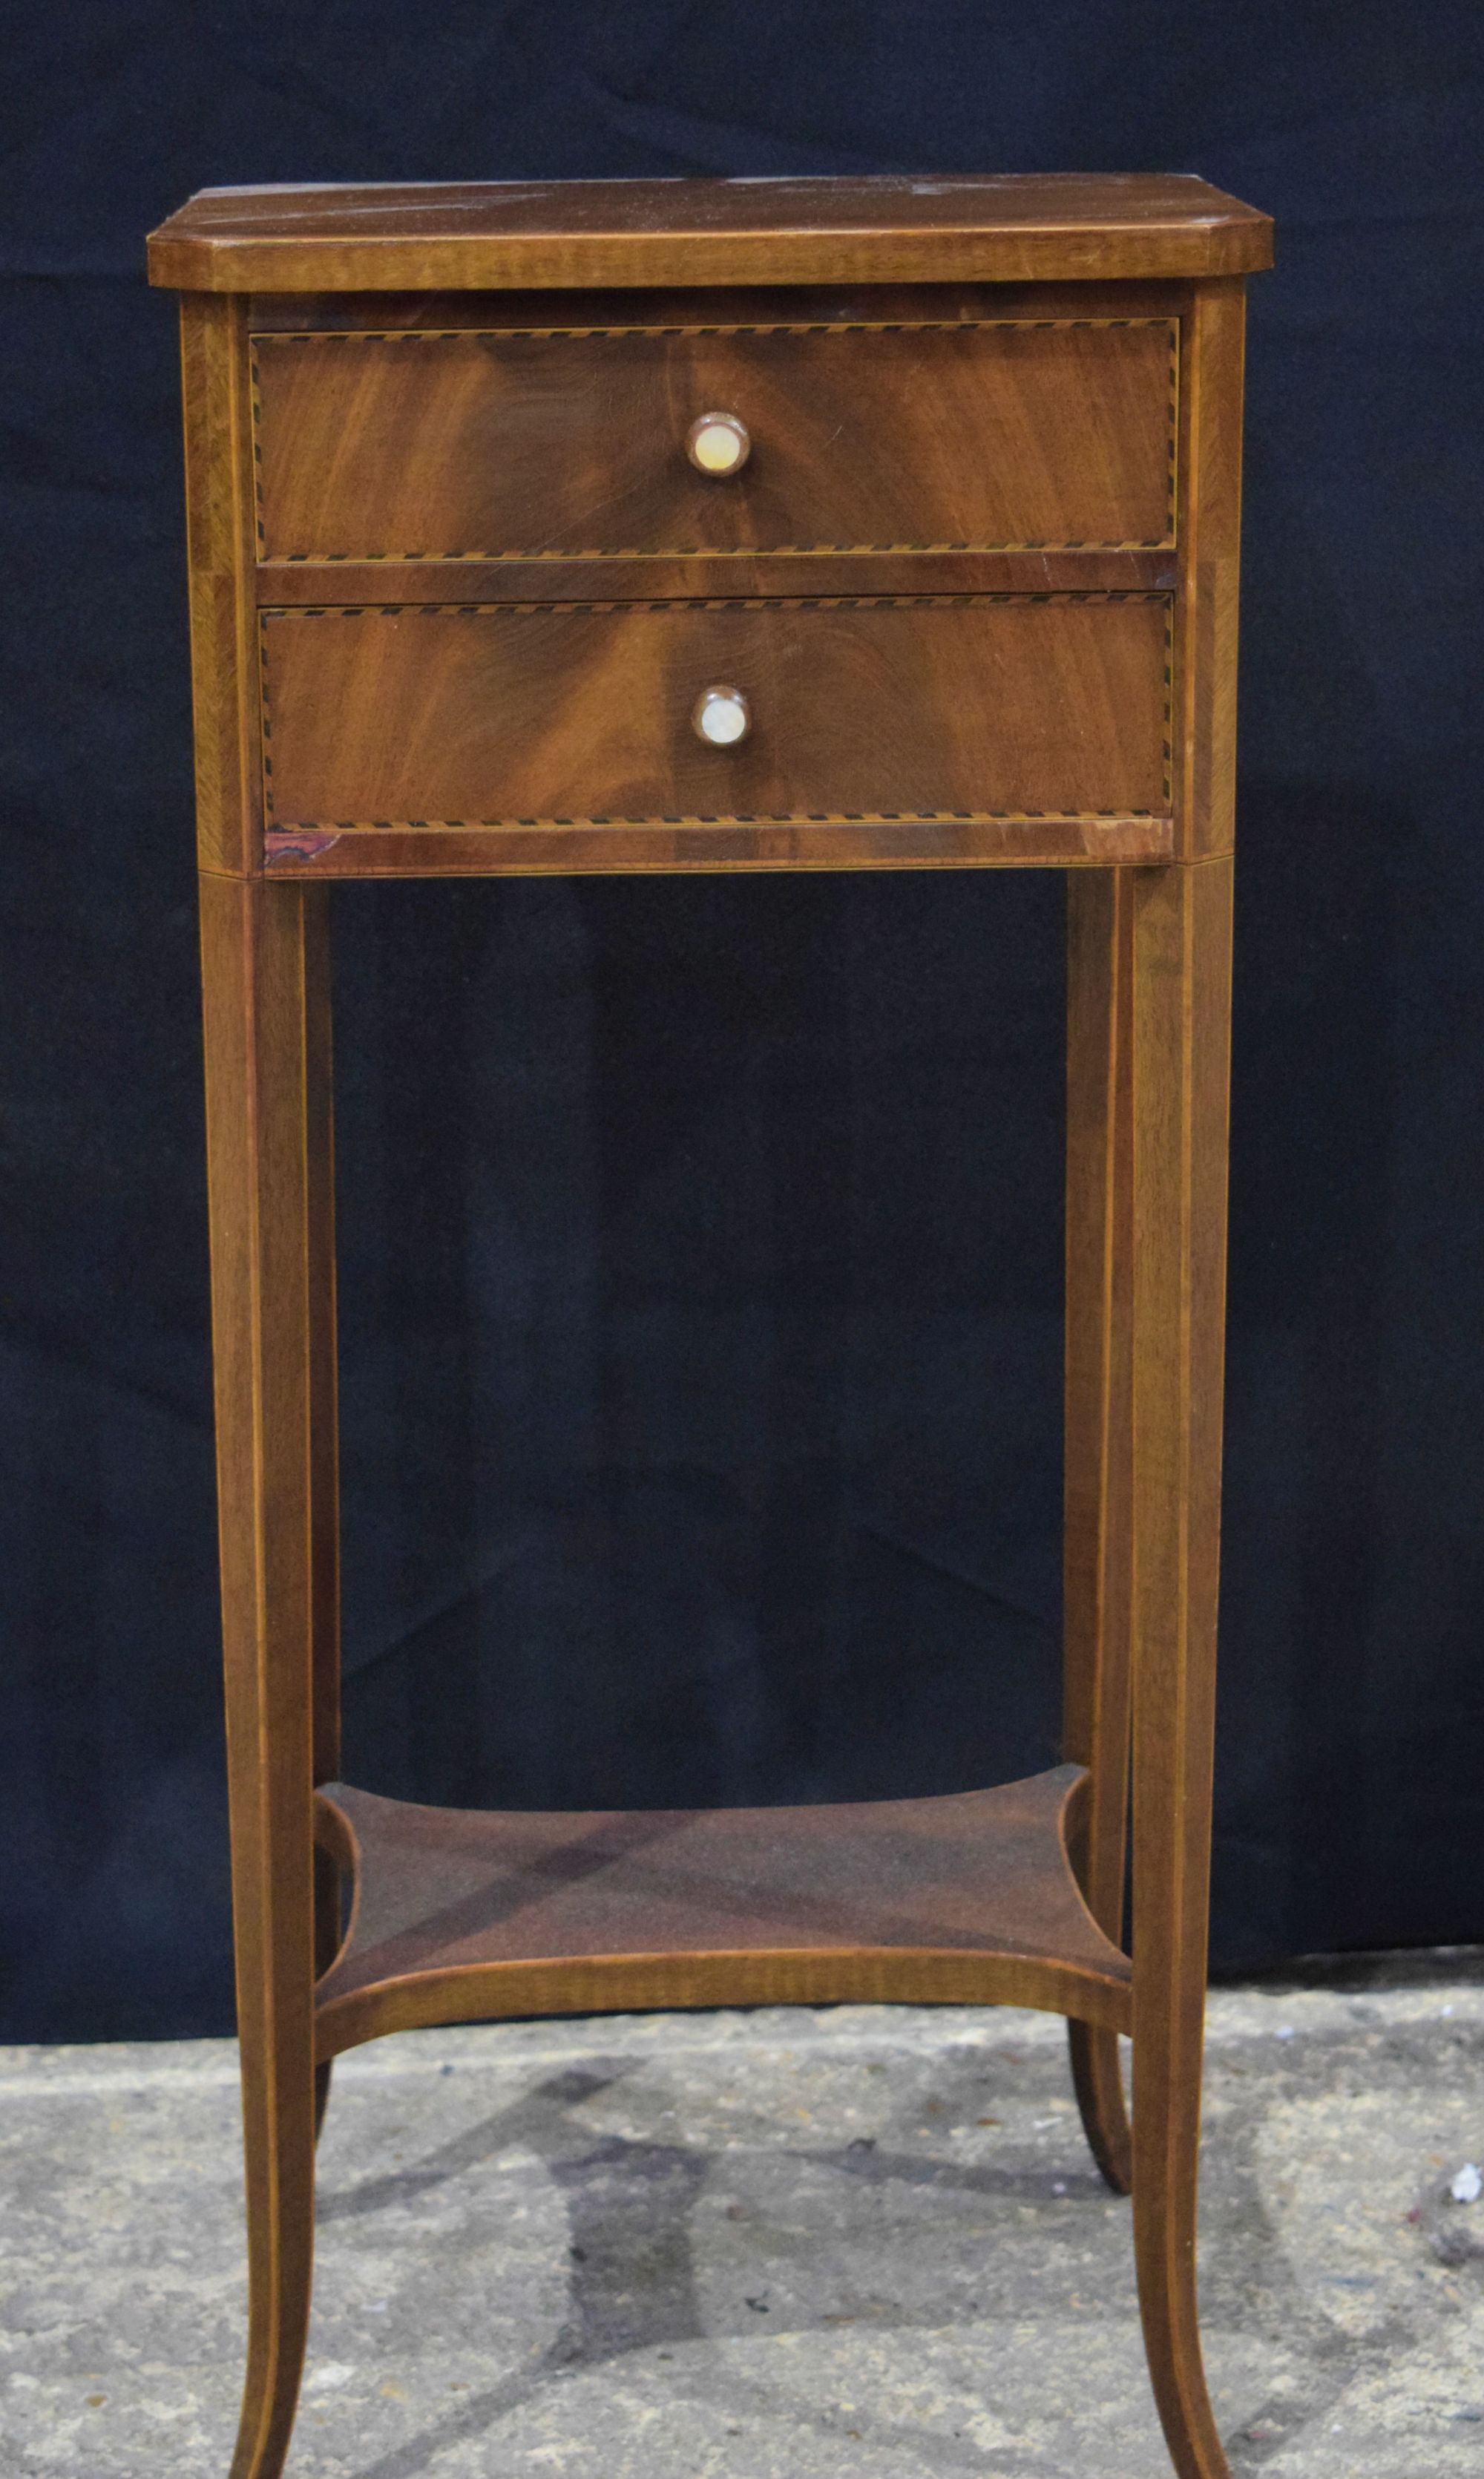 An Edwardian walnut two drawer two tier hall stand with inlay to border of drawers 67 x 28 x 21